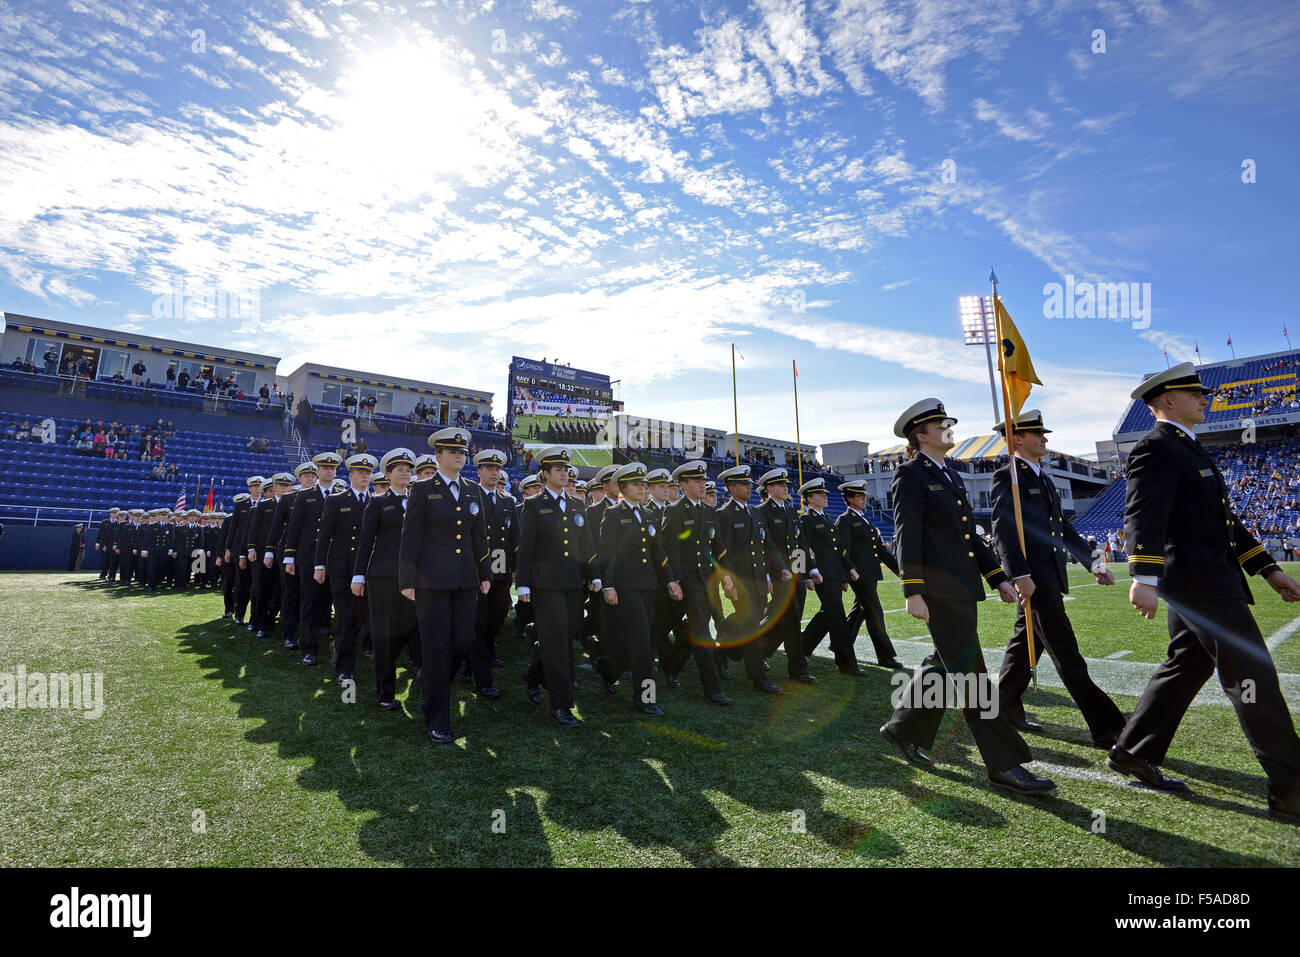 Annapolis, Maryland, USA. 31st Oct, 2015. The Navy Midshipmen march onto the field prior to the American Athletic Conference football game at Navy-Marine Corps Memorial Stadium. Credit:  Ken Inness/ZUMA Wire/Alamy Live News Stock Photo